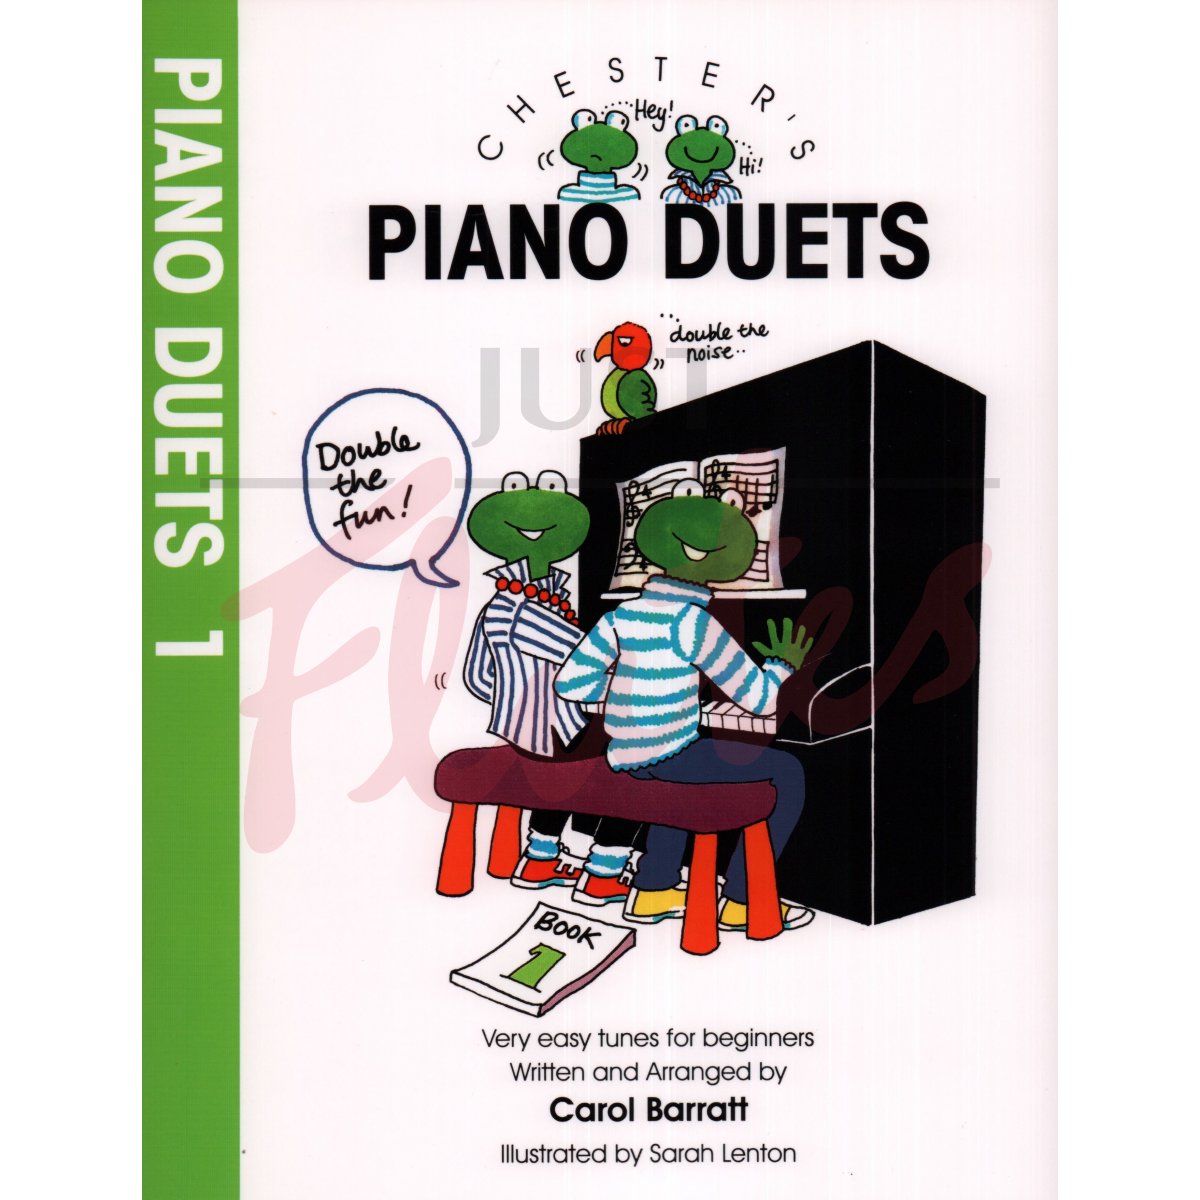 Chesters Piano Duets Vol 1